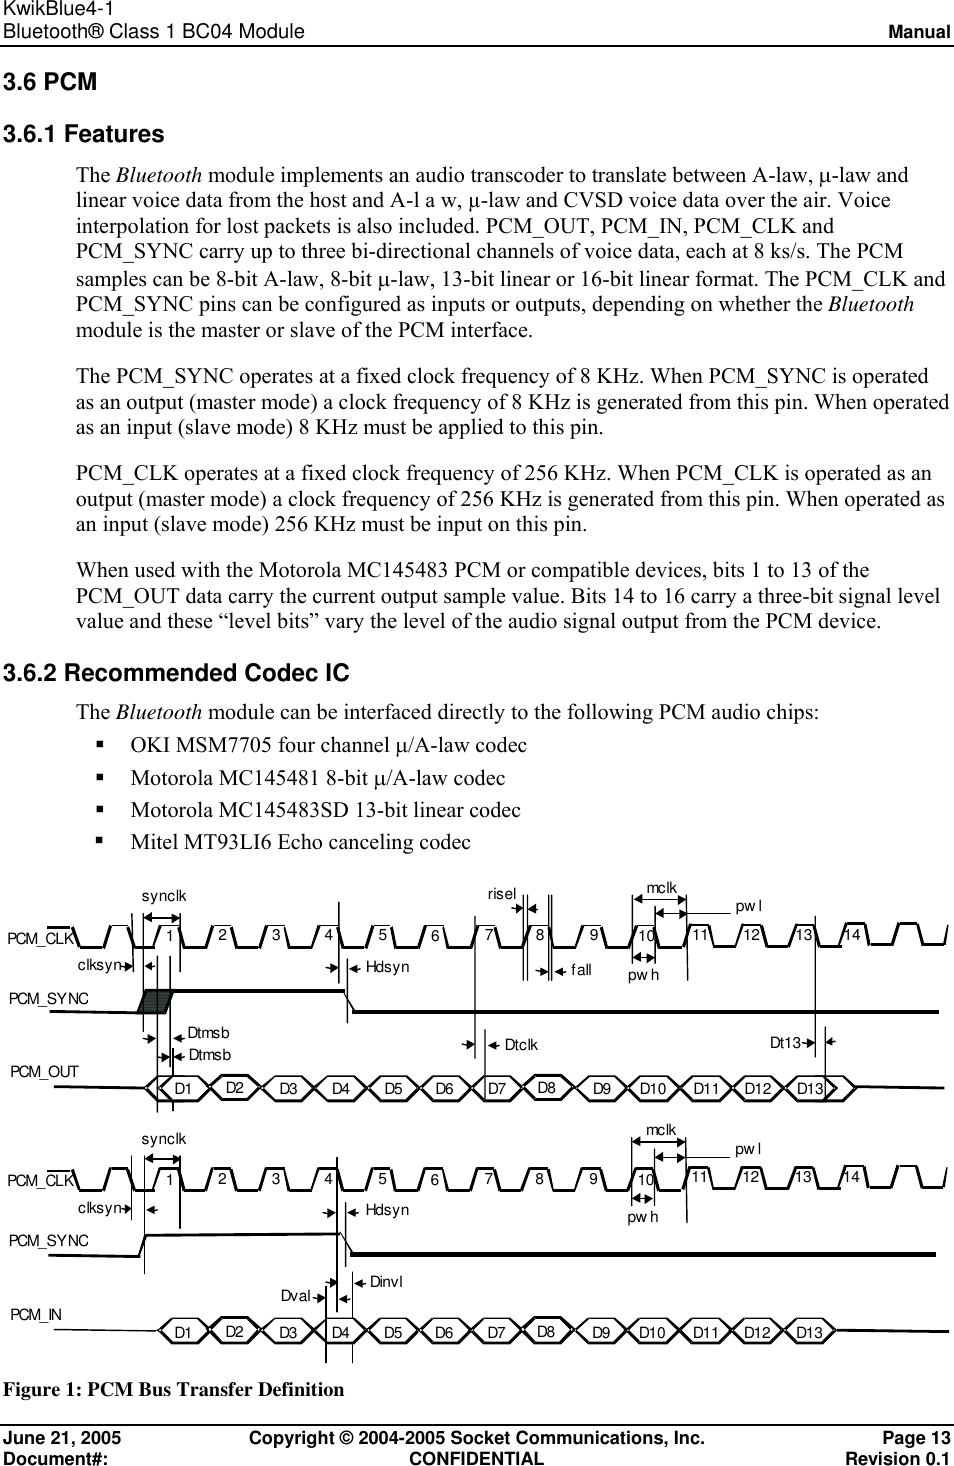 KwikBlue4-1  Bluetooth® Class 1 BC04 Module Manual  June 21, 2005  Copyright © 2004-2005 Socket Communications, Inc.  Page 13 Document#: CONFIDENTIAL Revision 0.1 3.6 PCM 3.6.1 Features The Bluetooth module implements an audio transcoder to translate between A-law, µ-law and linear voice data from the host and A-l a w, µ-law and CVSD voice data over the air. Voice interpolation for lost packets is also included. PCM_OUT, PCM_IN, PCM_CLK and PCM_SYNC carry up to three bi-directional channels of voice data, each at 8 ks/s. The PCM samples can be 8-bit A-law, 8-bit µ-law, 13-bit linear or 16-bit linear format. The PCM_CLK and PCM_SYNC pins can be configured as inputs or outputs, depending on whether the Bluetooth module is the master or slave of the PCM interface.  The PCM_SYNC operates at a fixed clock frequency of 8 KHz. When PCM_SYNC is operated as an output (master mode) a clock frequency of 8 KHz is generated from this pin. When operated as an input (slave mode) 8 KHz must be applied to this pin. PCM_CLK operates at a fixed clock frequency of 256 KHz. When PCM_CLK is operated as an output (master mode) a clock frequency of 256 KHz is generated from this pin. When operated as an input (slave mode) 256 KHz must be input on this pin. When used with the Motorola MC145483 PCM or compatible devices, bits 1 to 13 of the PCM_OUT data carry the current output sample value. Bits 14 to 16 carry a three-bit signal level value and these “level bits” vary the level of the audio signal output from the PCM device. 3.6.2 Recommended Codec IC The Bluetooth module can be interfaced directly to the following PCM audio chips:   OKI MSM7705 four channel µ/A-law codec   Motorola MC145481 8-bit µ/A-law codec   Motorola MC145483SD 13-bit linear codec   Mitel MT93LI6 Echo canceling codec           Figure 1: PCM Bus Transfer Definition DtmsbDtmsb1765432 98 10clksynPCM_CLK1211 13 14D1 D2 D3 D4 D5 D6 D7 D8 D9 D10 D11 D12 D13mc lkpw hpw lriselfallsynclkDt13DtclkPCM_SY NCPCM_OUTHdsynDval1765432 98 10clksynPCM_CLK1211 13 14D1 D2 D3 D4 D5 D6 D7 D8 D9 D10 D11 D12 D13mc lkpw hpw lsynclkPCM_SY NCPCM_INDinvlHdsyn